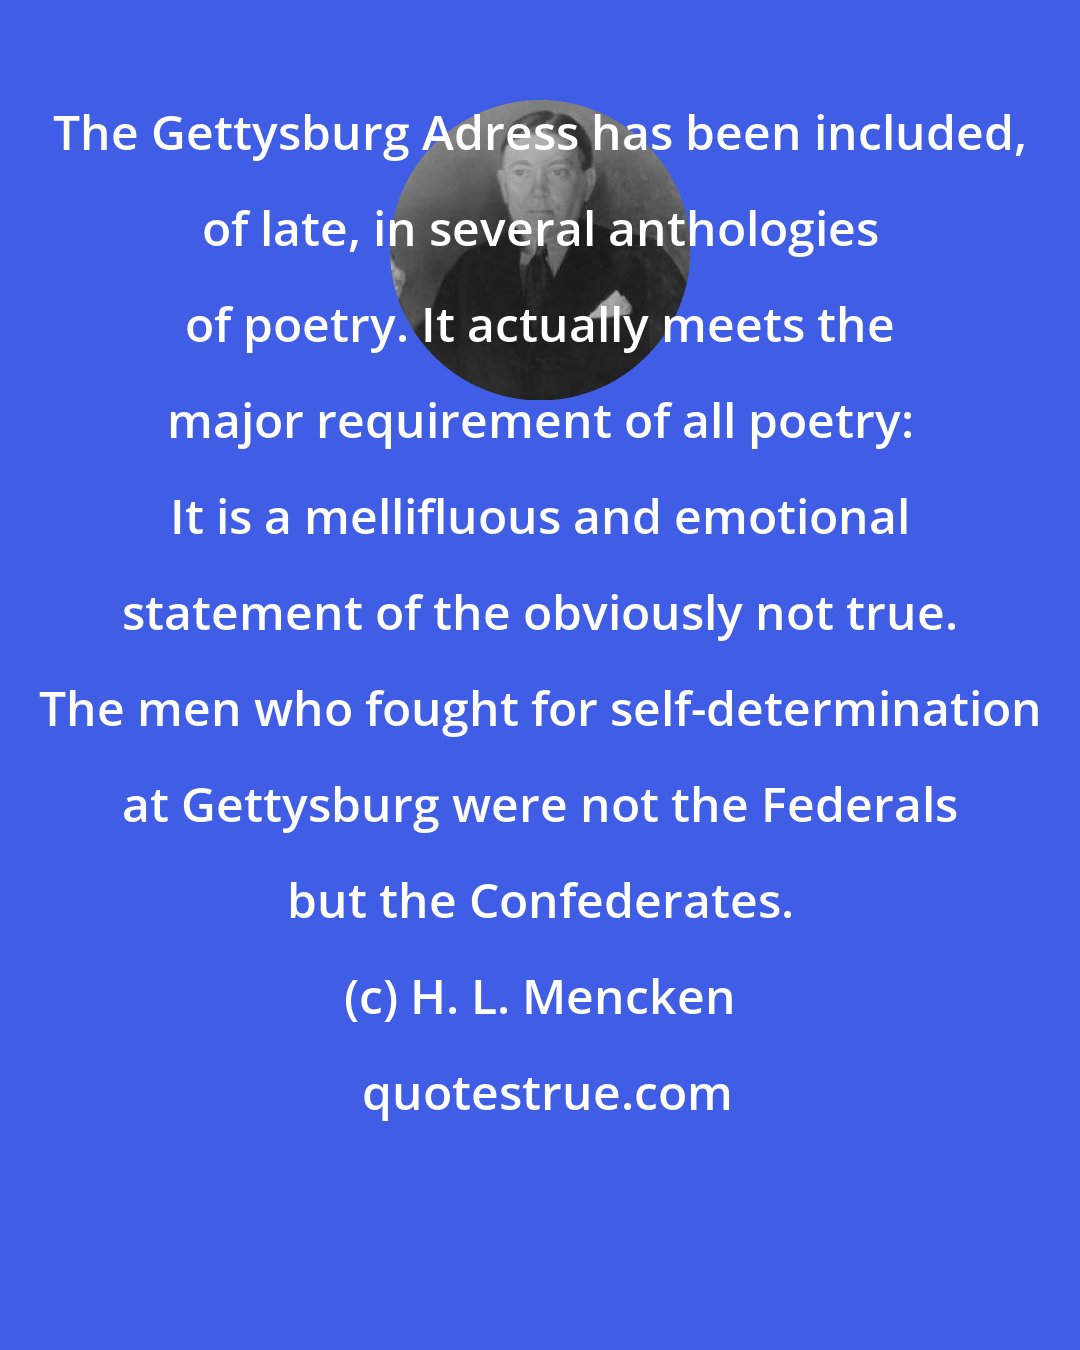 H. L. Mencken: The Gettysburg Adress has been included, of late, in several anthologies of poetry. It actually meets the major requirement of all poetry: It is a mellifluous and emotional statement of the obviously not true. The men who fought for self-determination at Gettysburg were not the Federals but the Confederates.